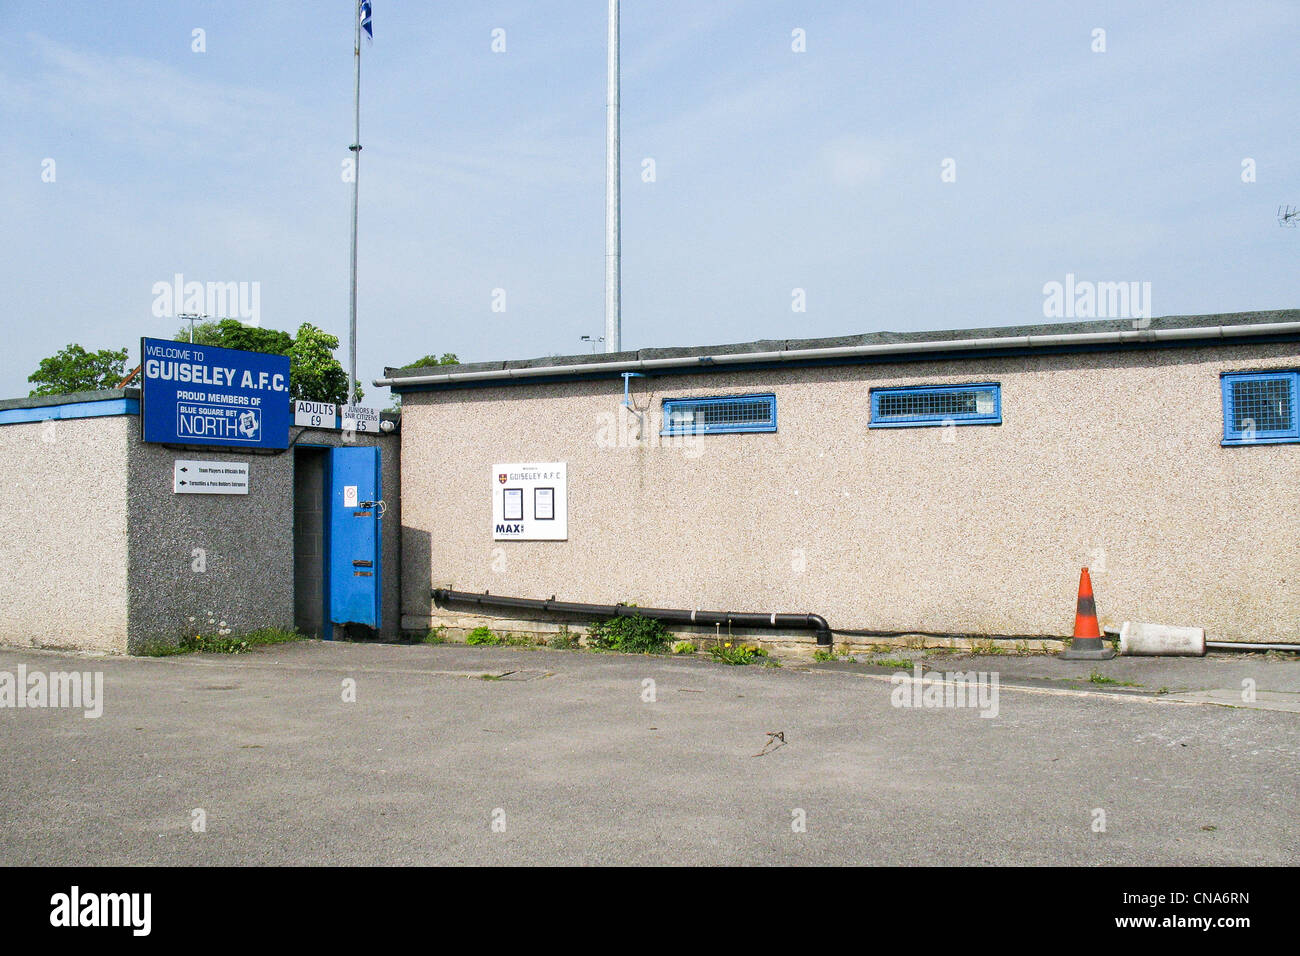 Guiseley Football Club Banque D'Images